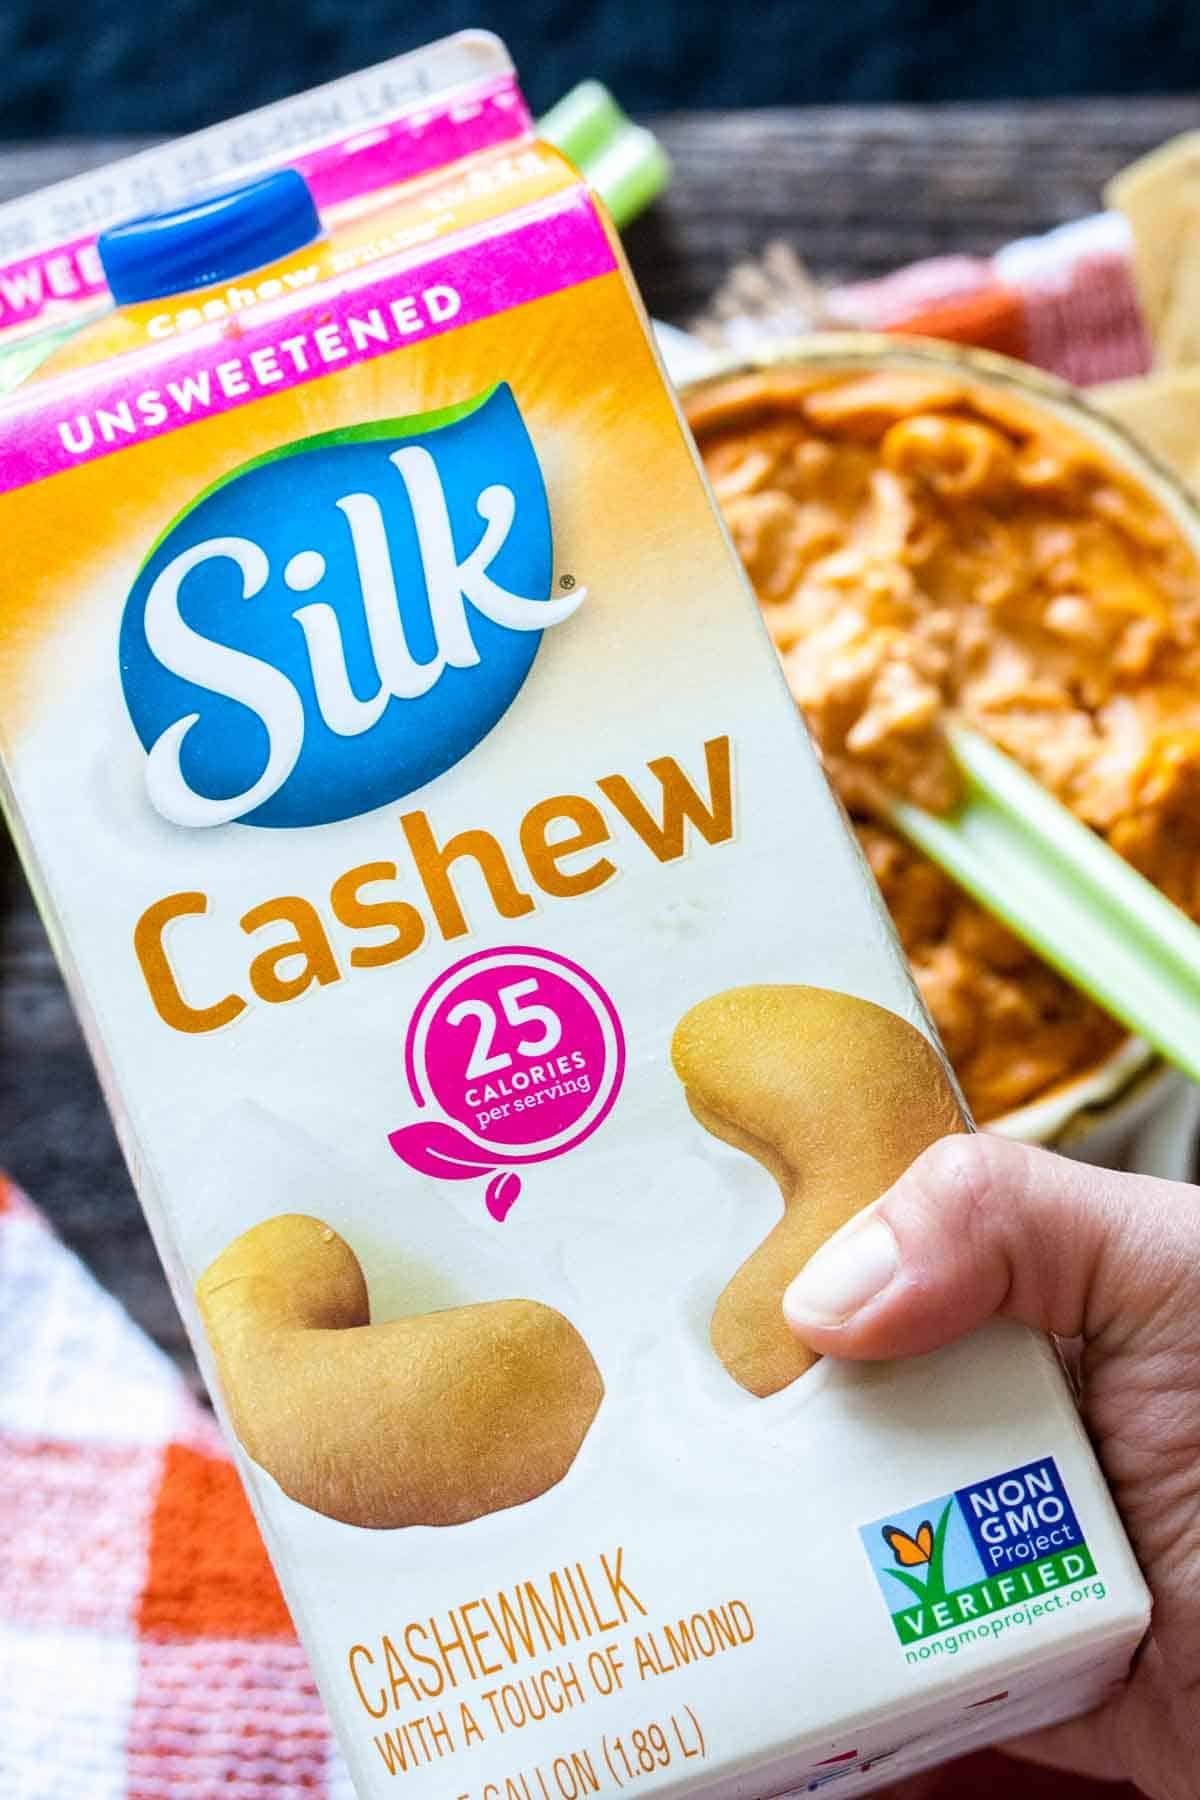 Hand holding a colorful carton of Silk brand unsweetened cashew milk.